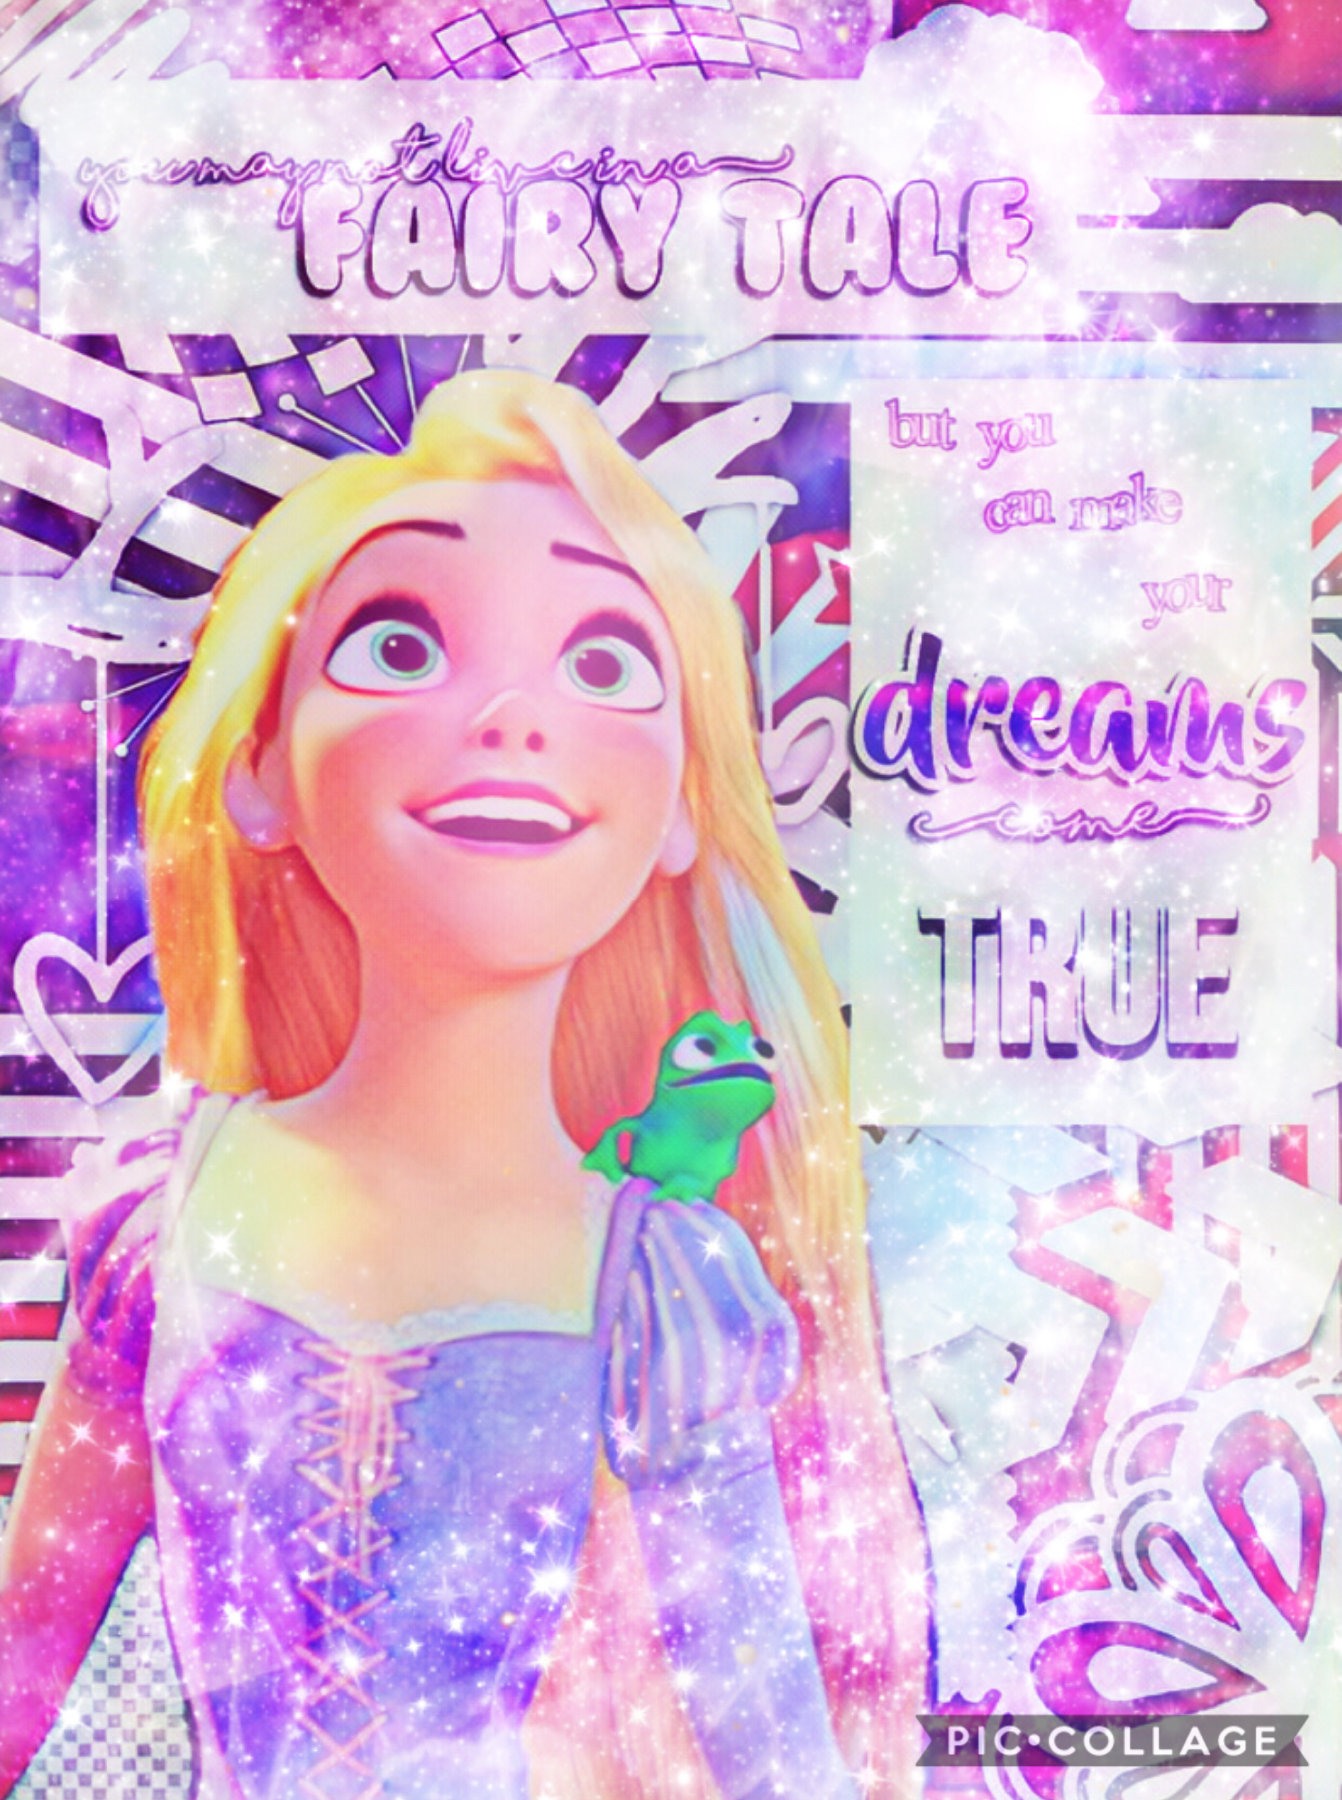 When I first thought of the quote, I thought “Rapunzel”, which is funny because she is in a fairy tale. I guess I just wanted to make a purple edit....whatever 🤷🏻‍♀️ Enjoy! 💜VOTE FOR MY NEW USERNAME if you haven’t already!!💜